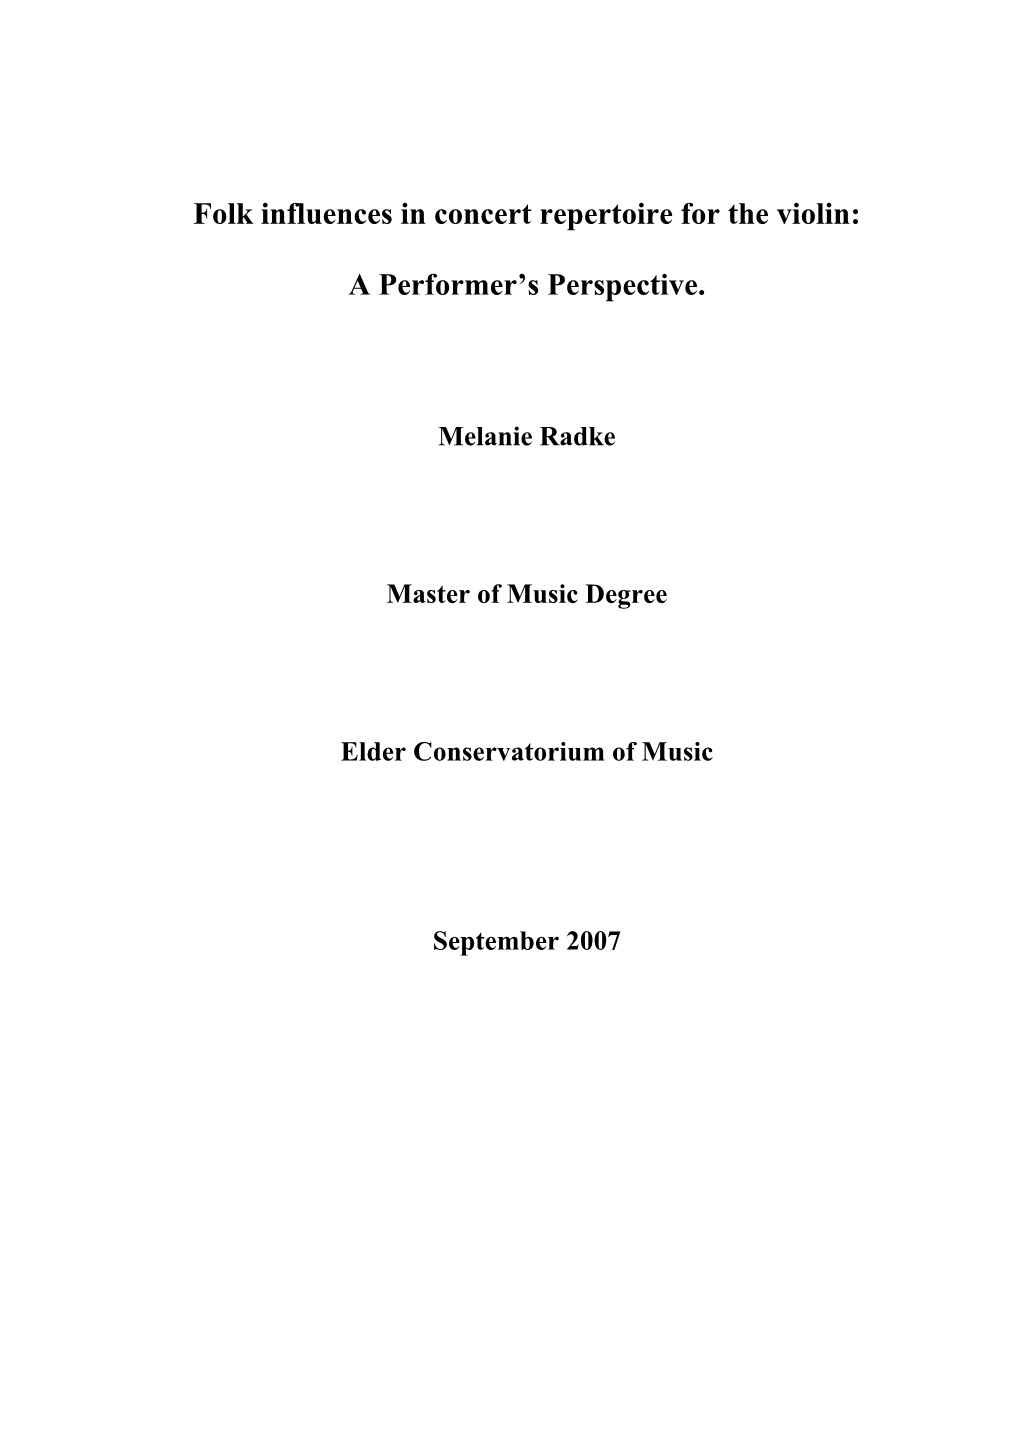 Folk Influences in Concert Repertoire for the Violin: a Performer's